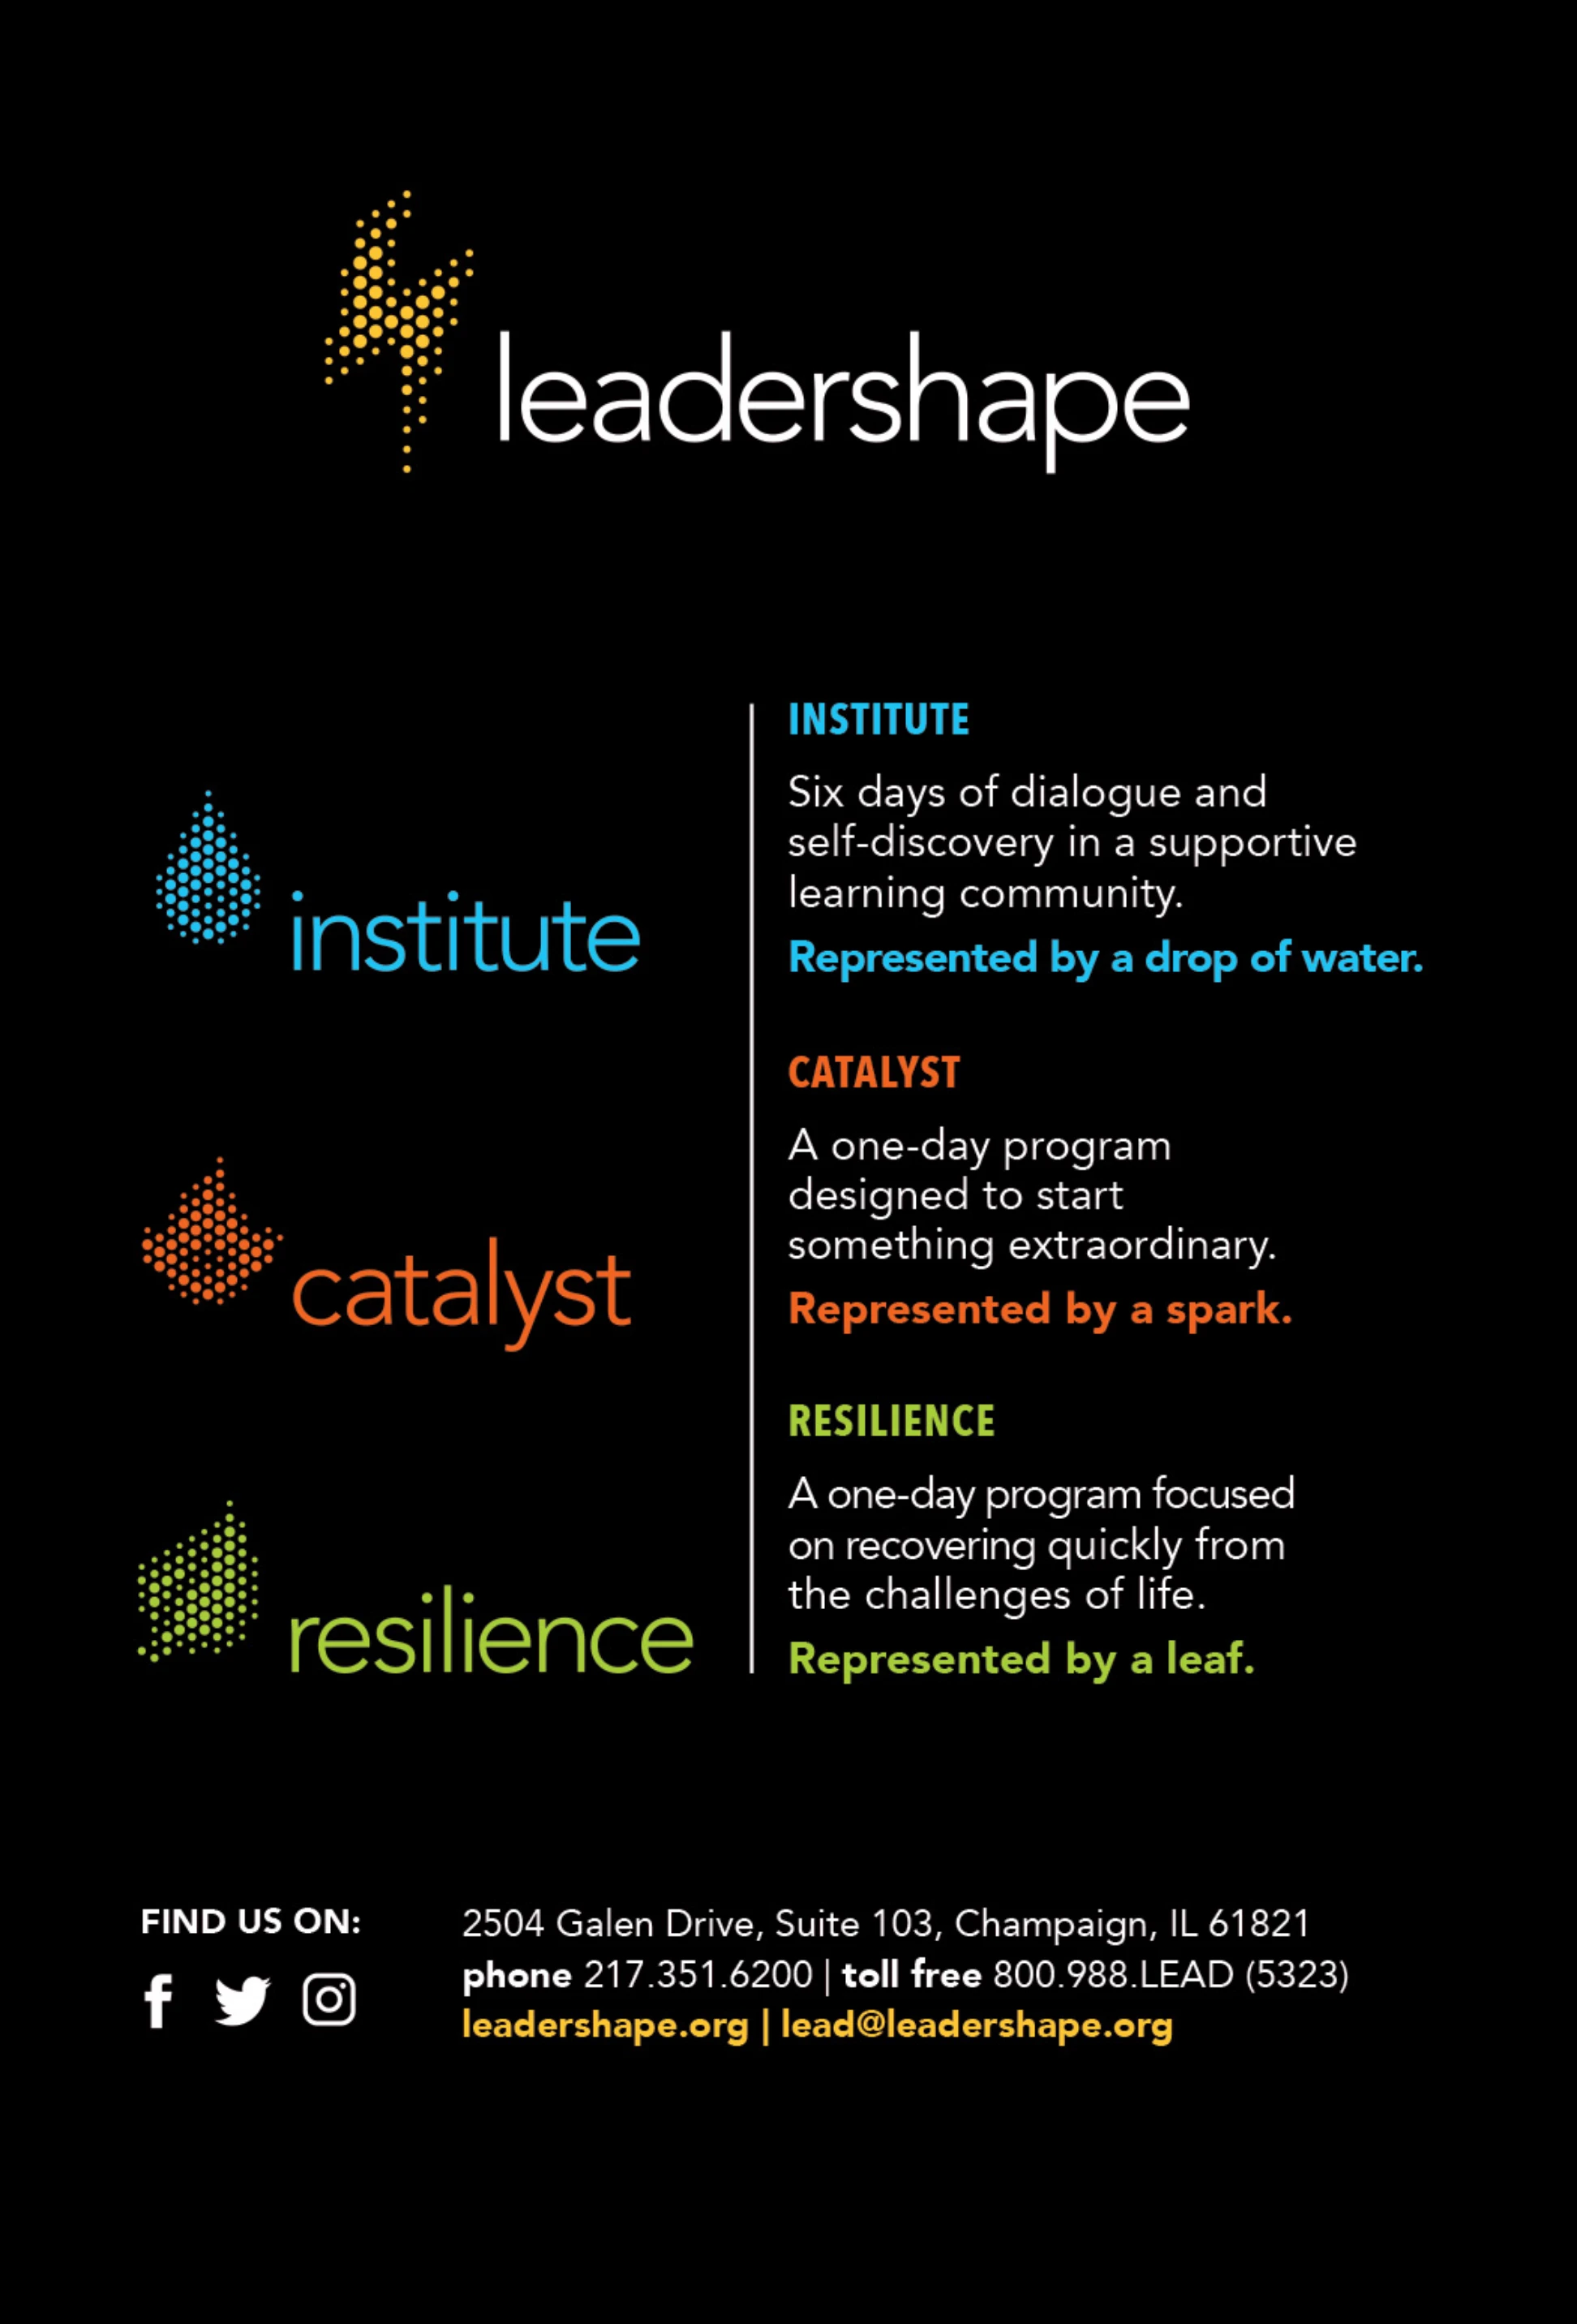 The logo for the leadership shape institute.